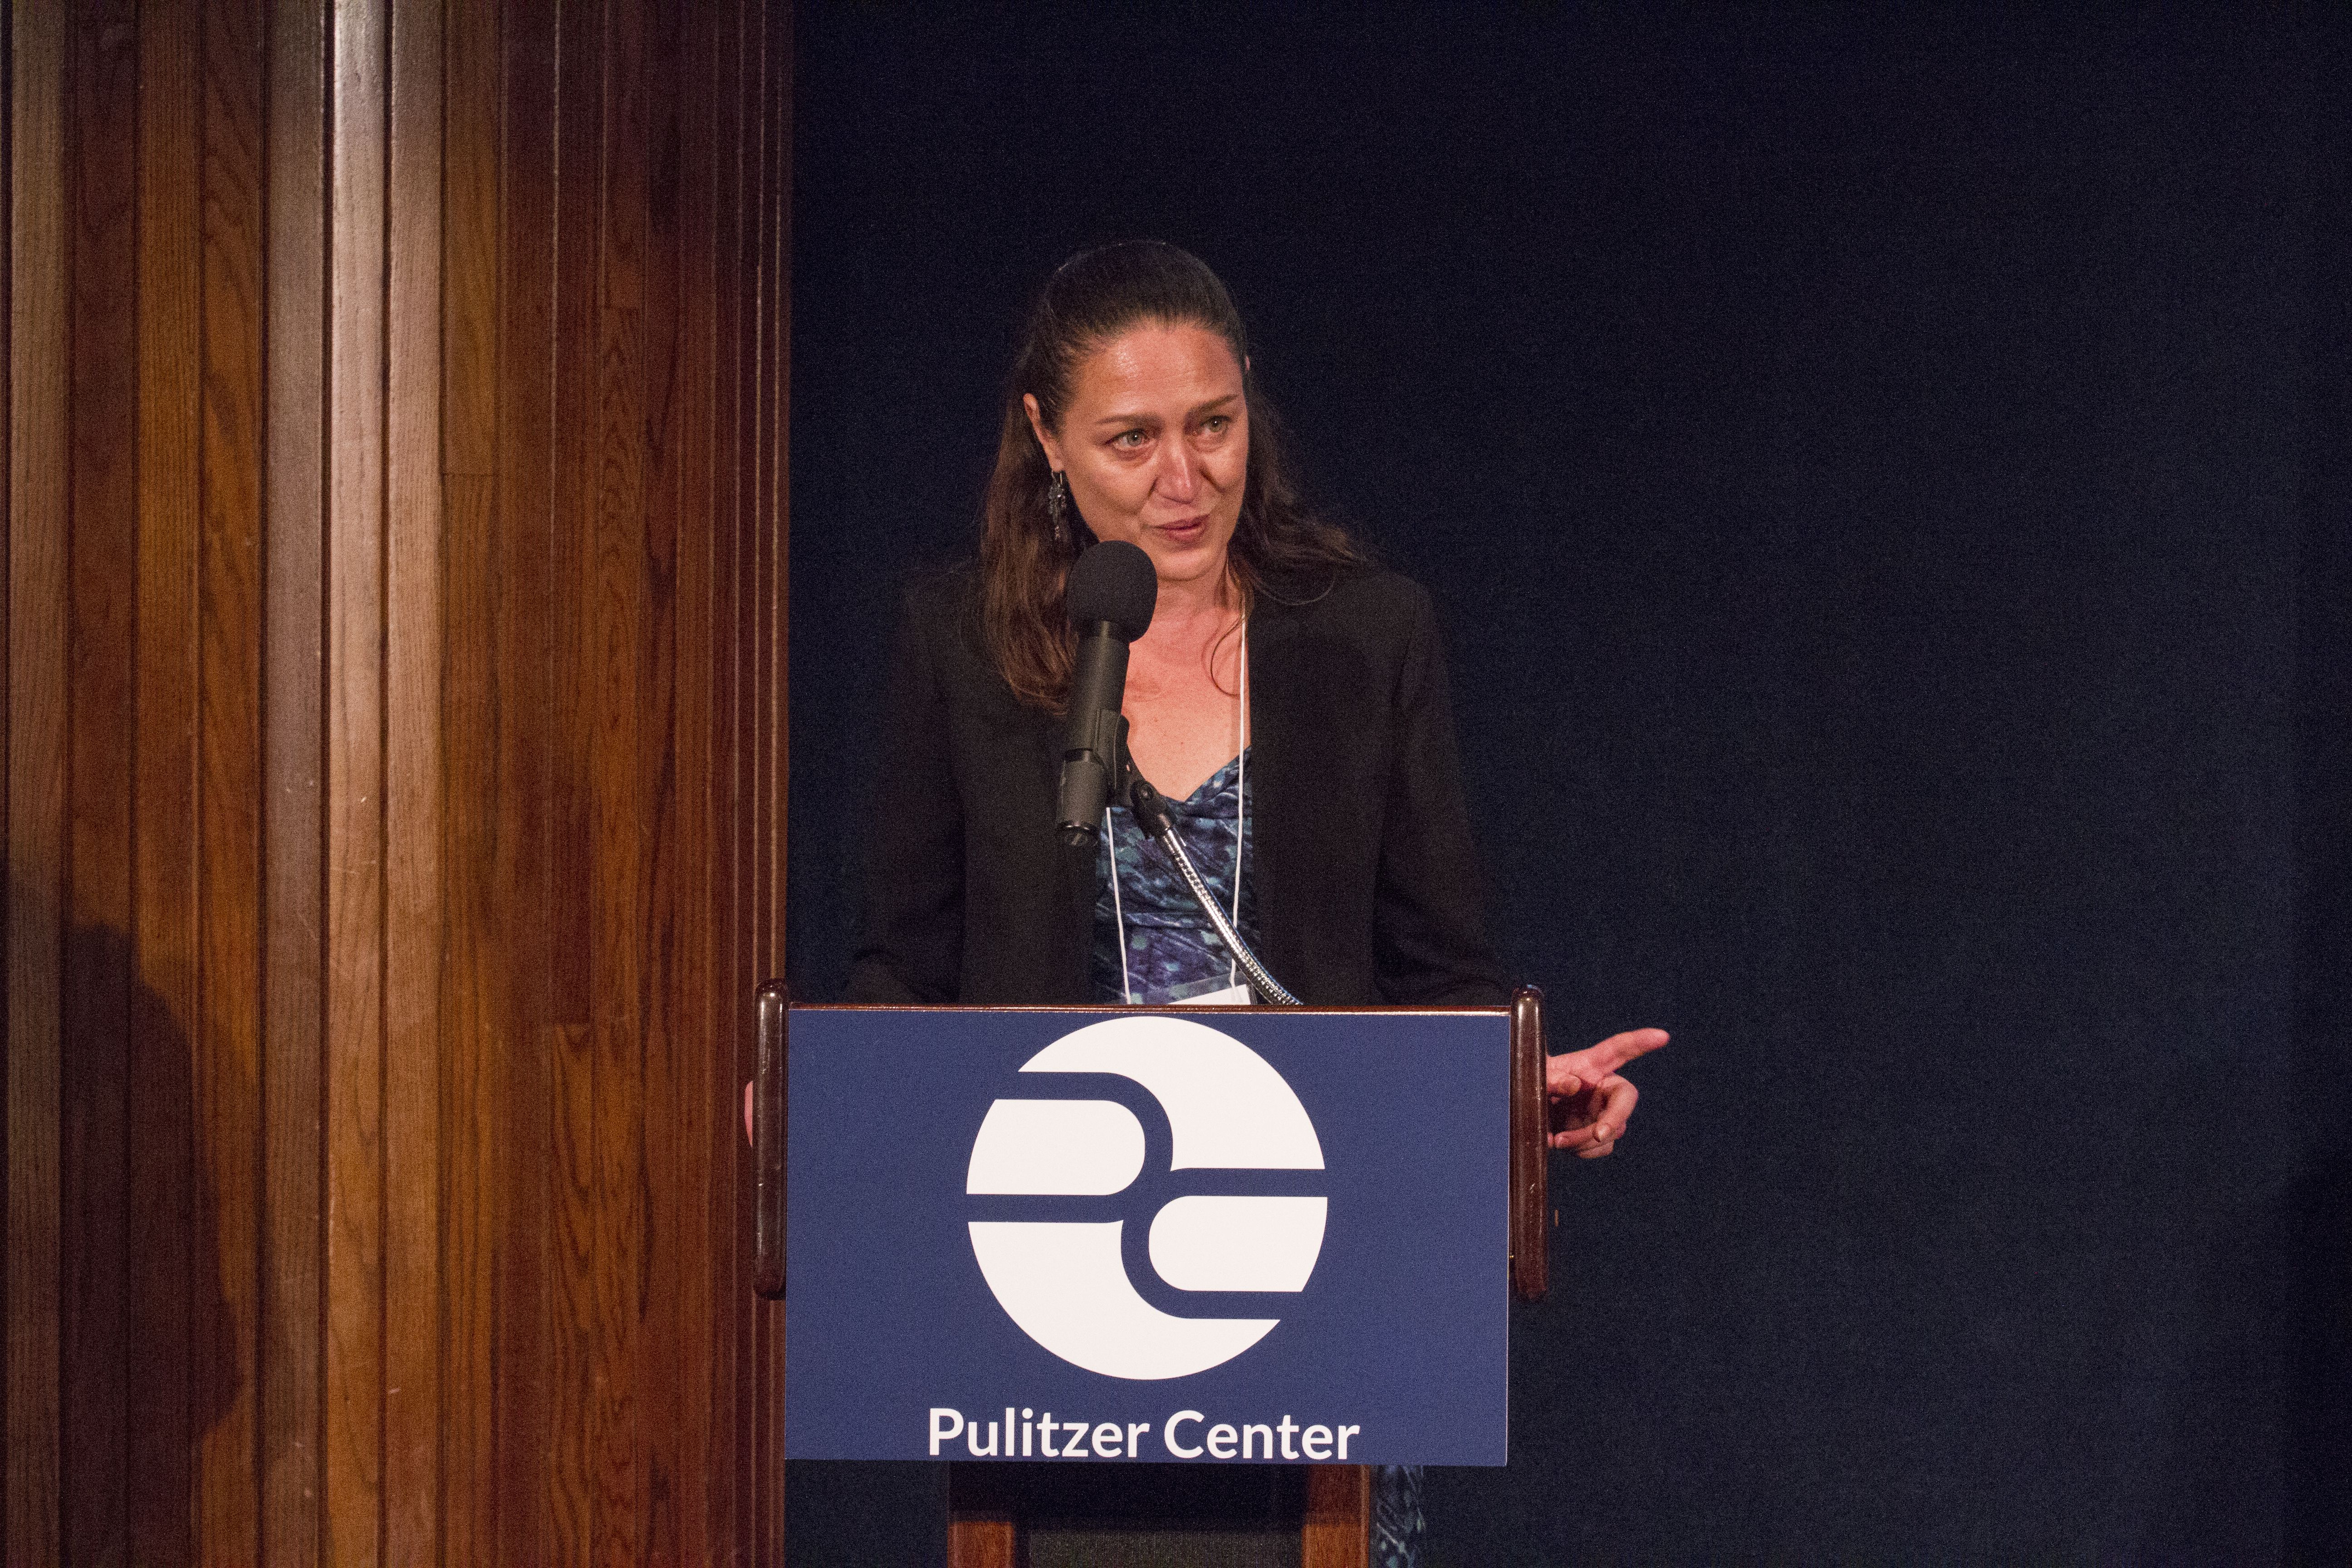 Nathalie Applewhite shares the story behind choosing to focus the Pulitzer Center 2017 conference on gender. Image by Jin Ding. United States, 2017. 